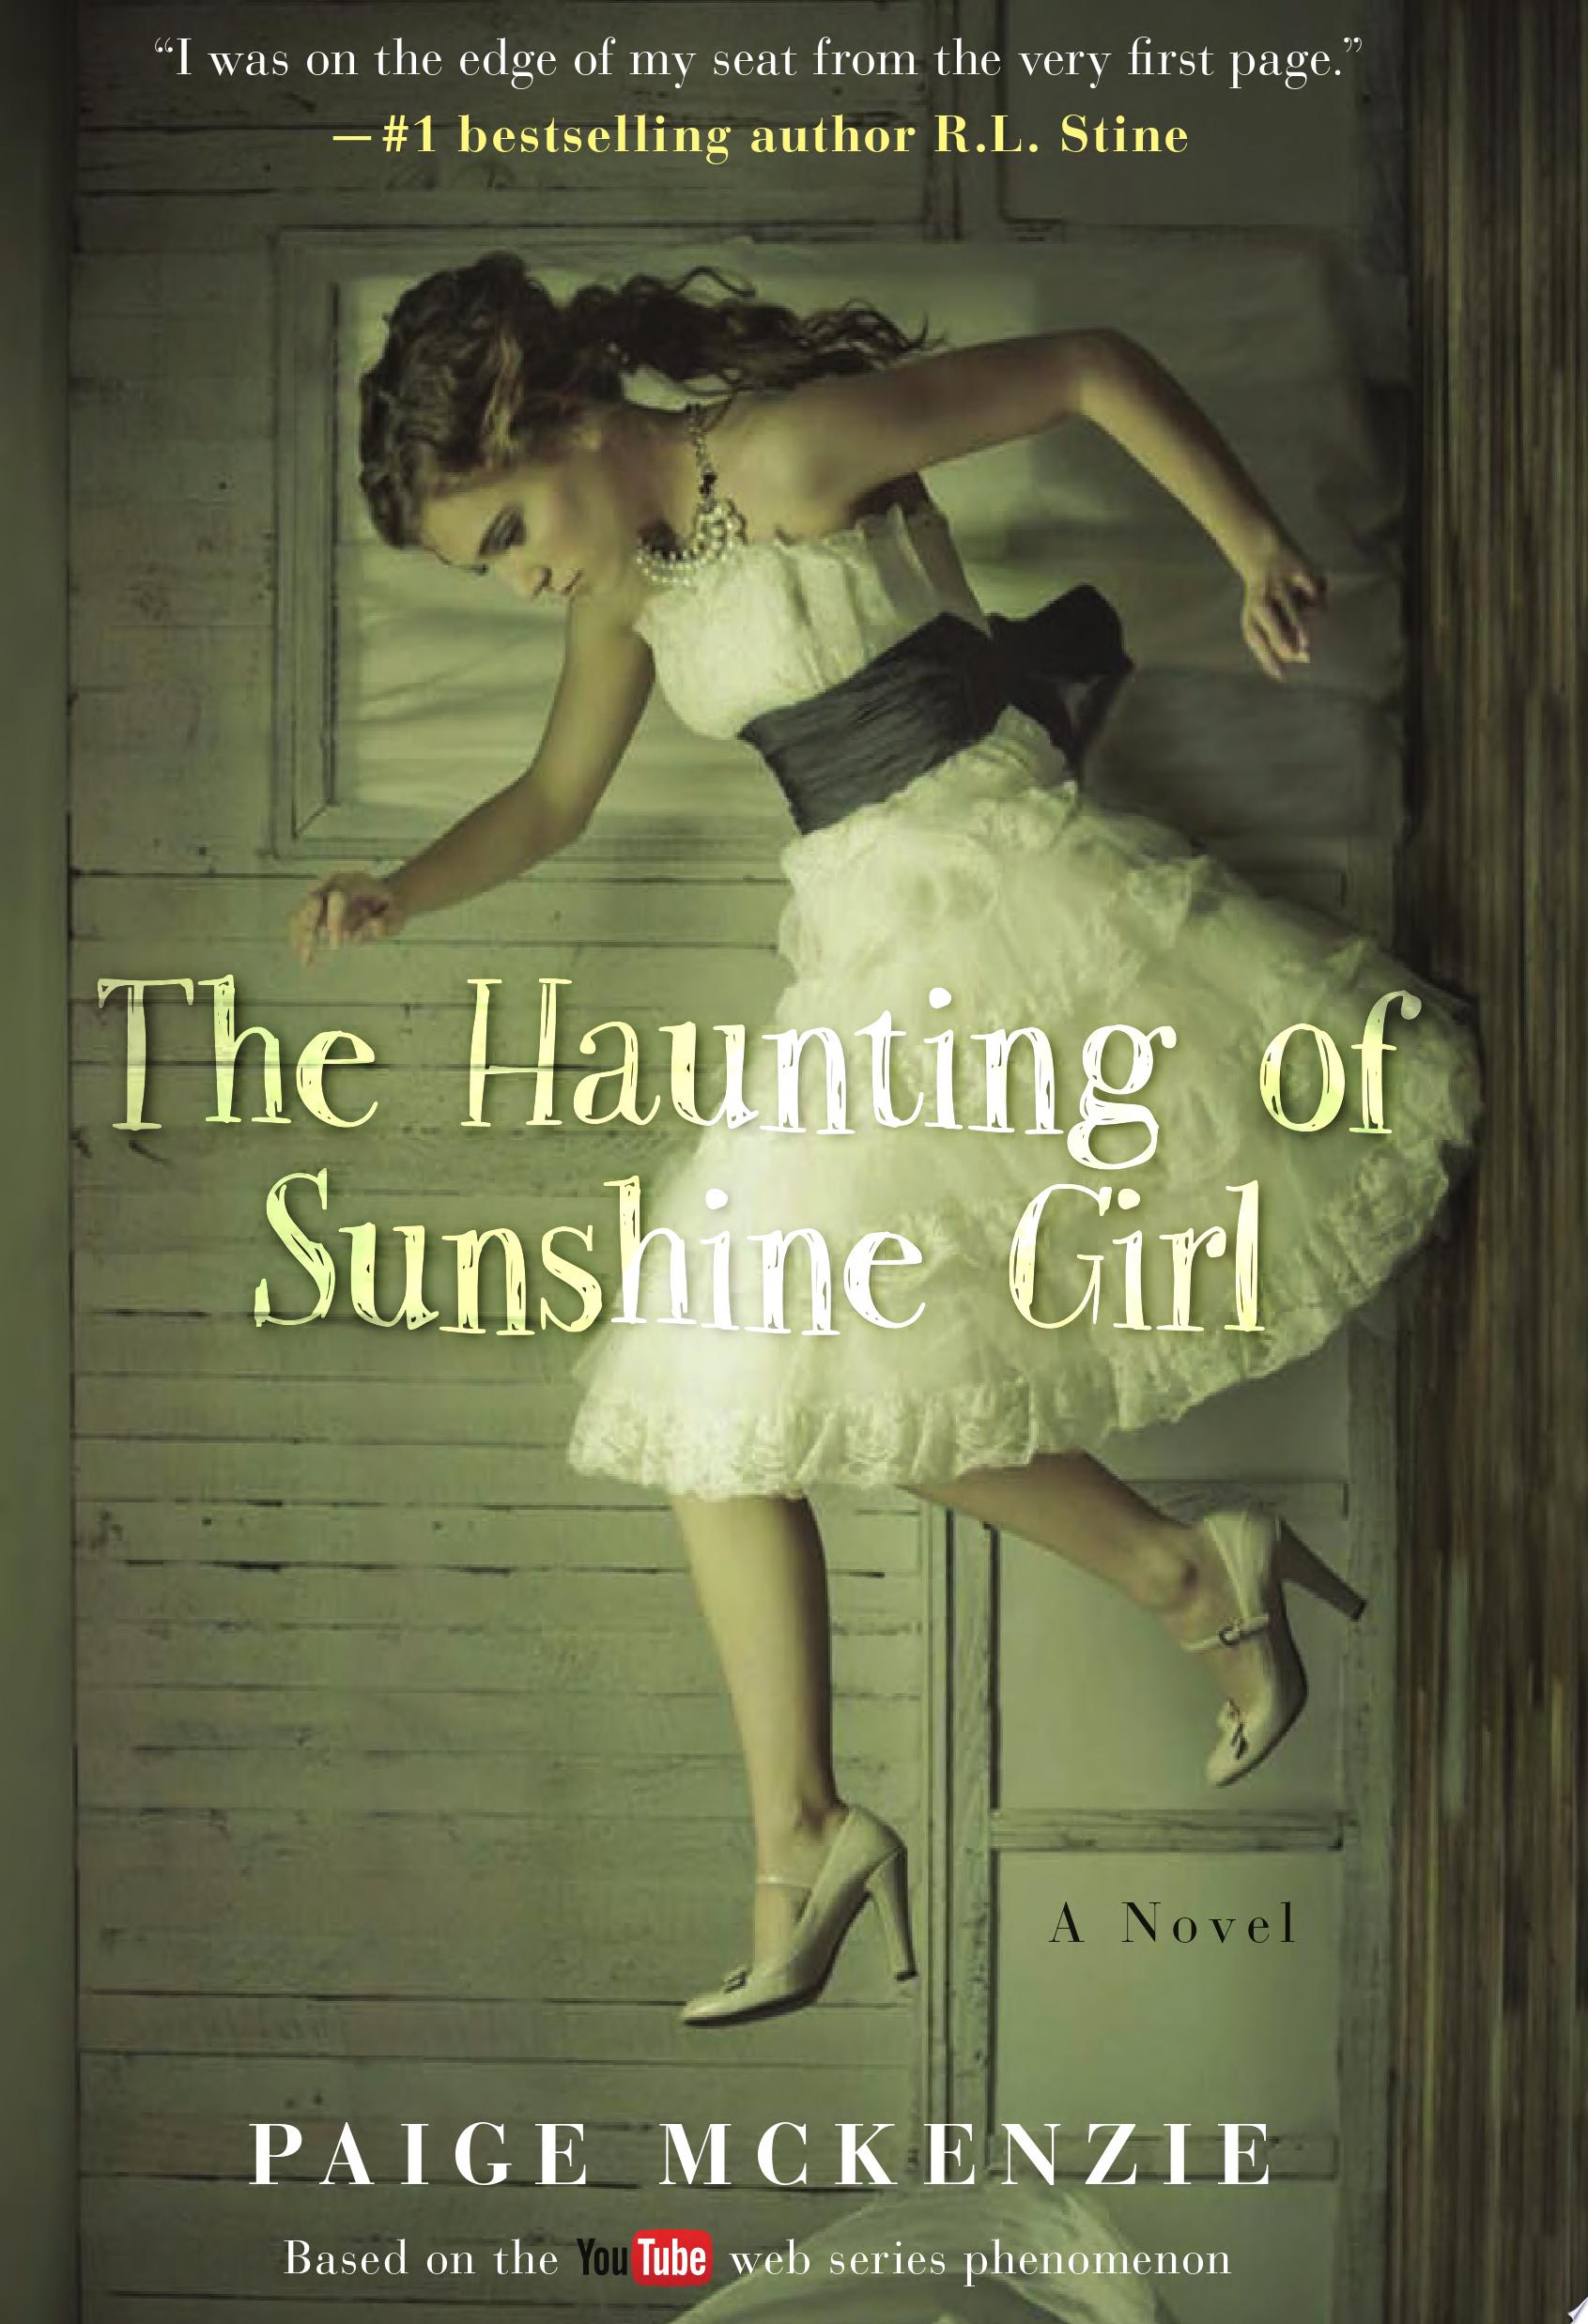 Image for "The Haunting of Sunshine Girl"